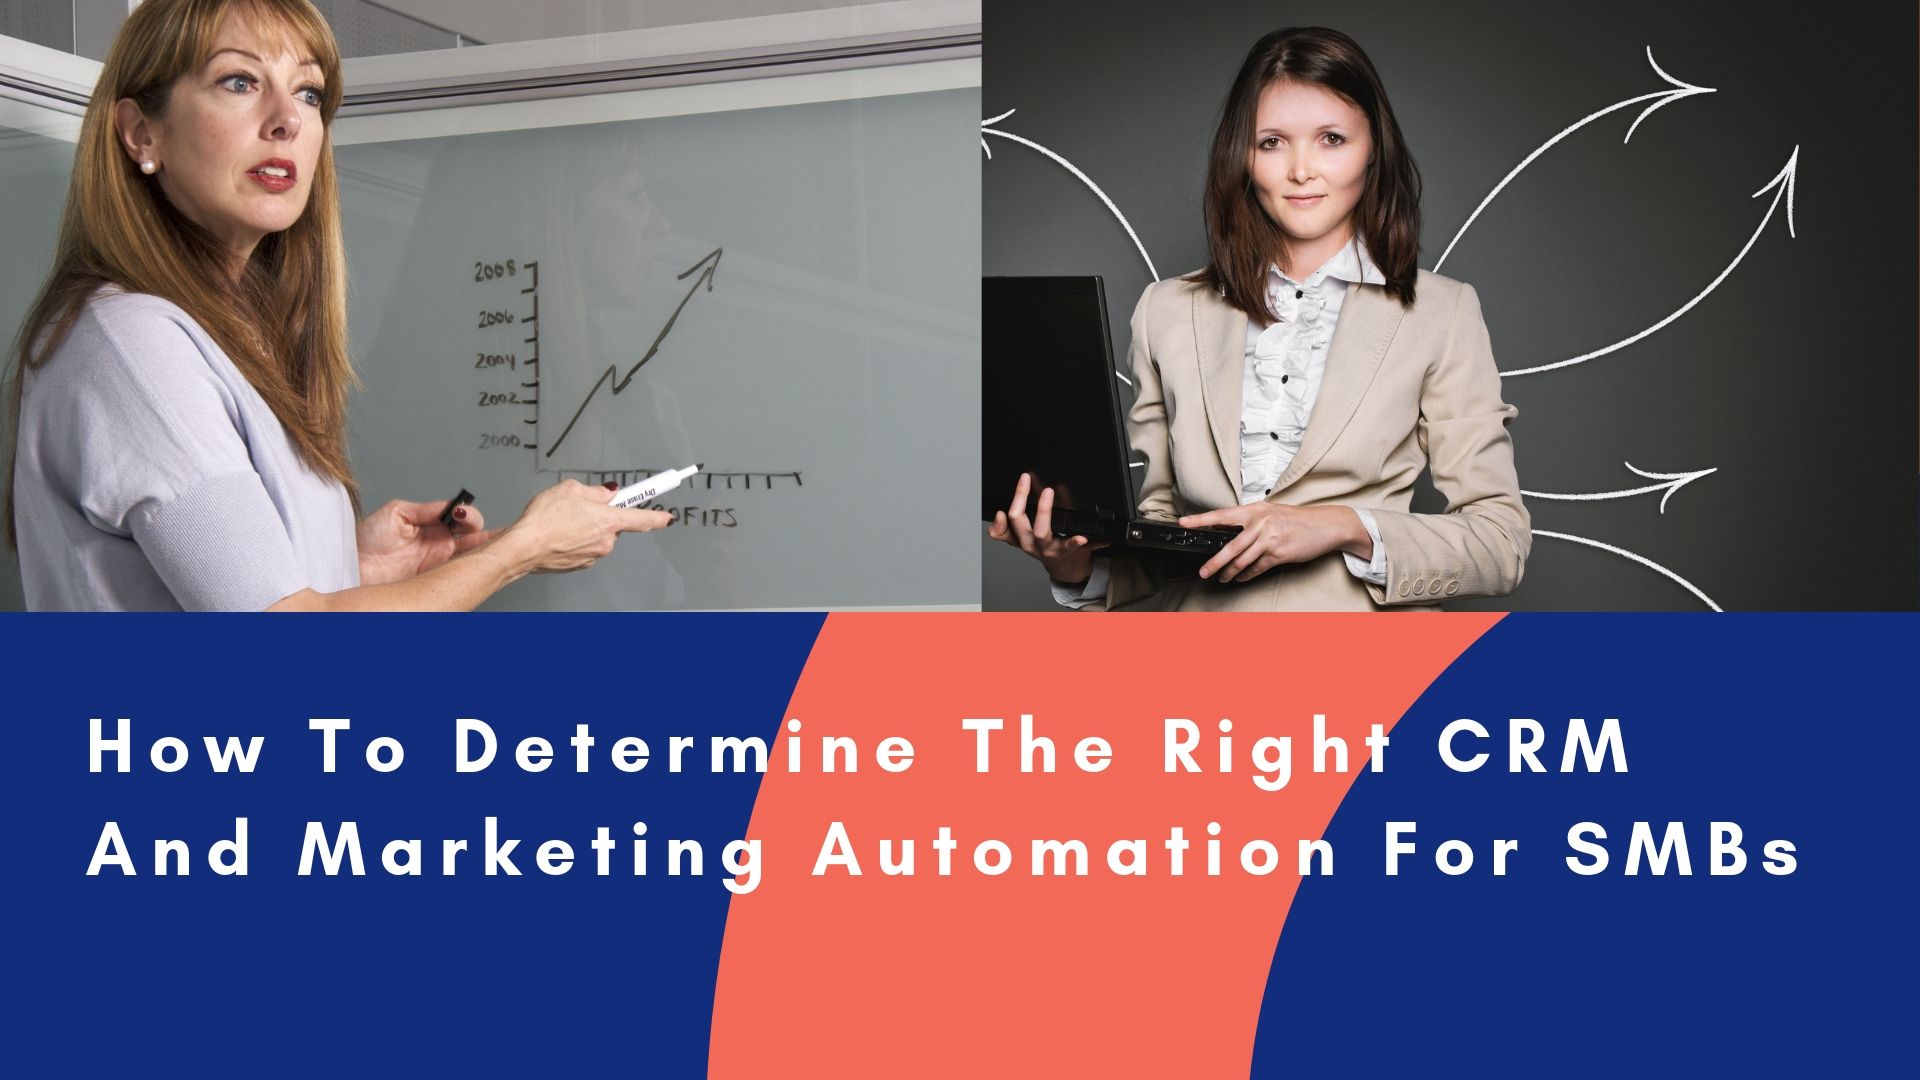 How To Determine The Right CRM And Marketing Automation Tools For Your SMBs